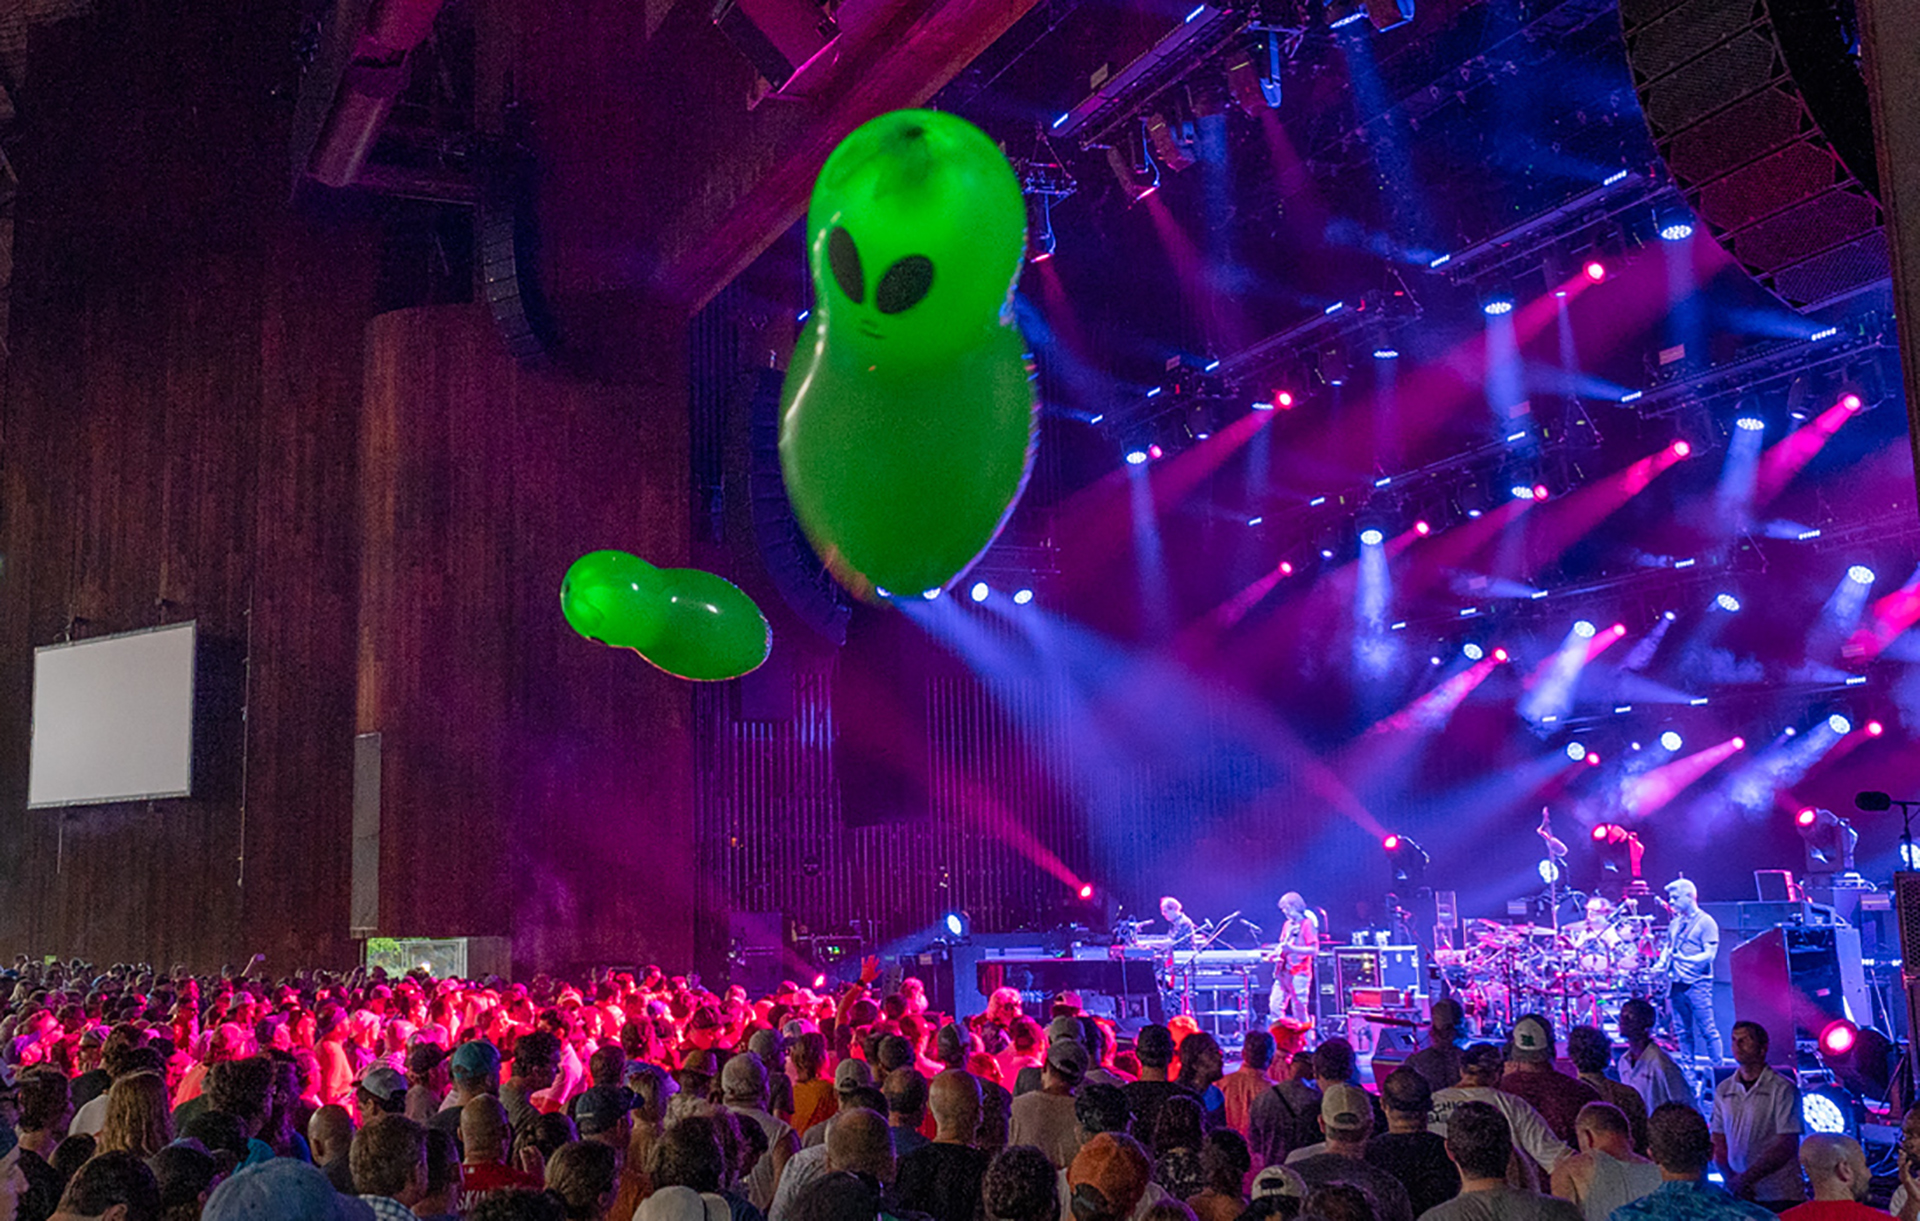 Phish returns to The Mann for a sold out crowd and a second set